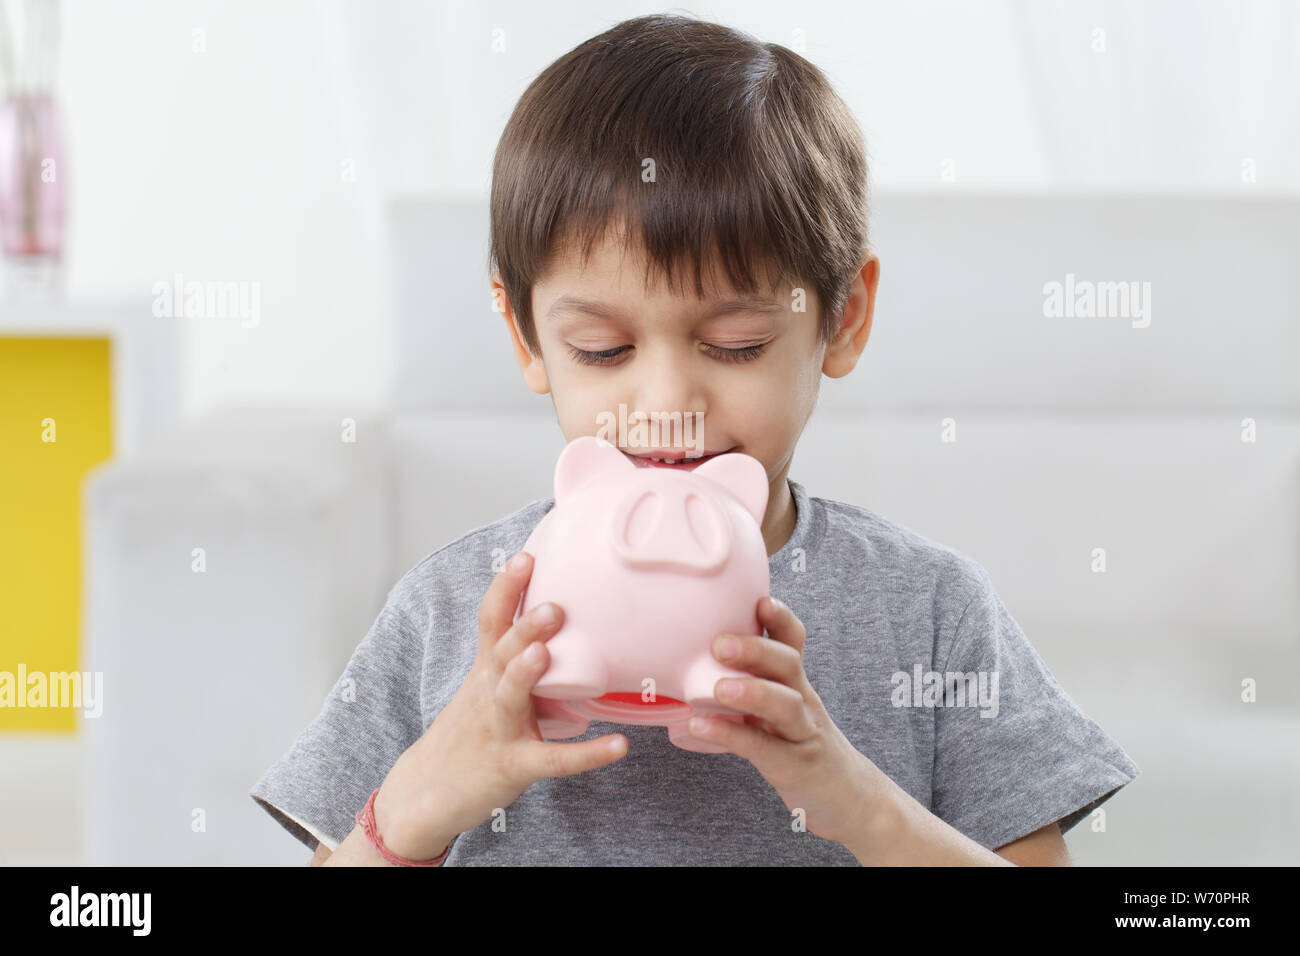 Boy holding a piggy bank and smiling Stock Photo